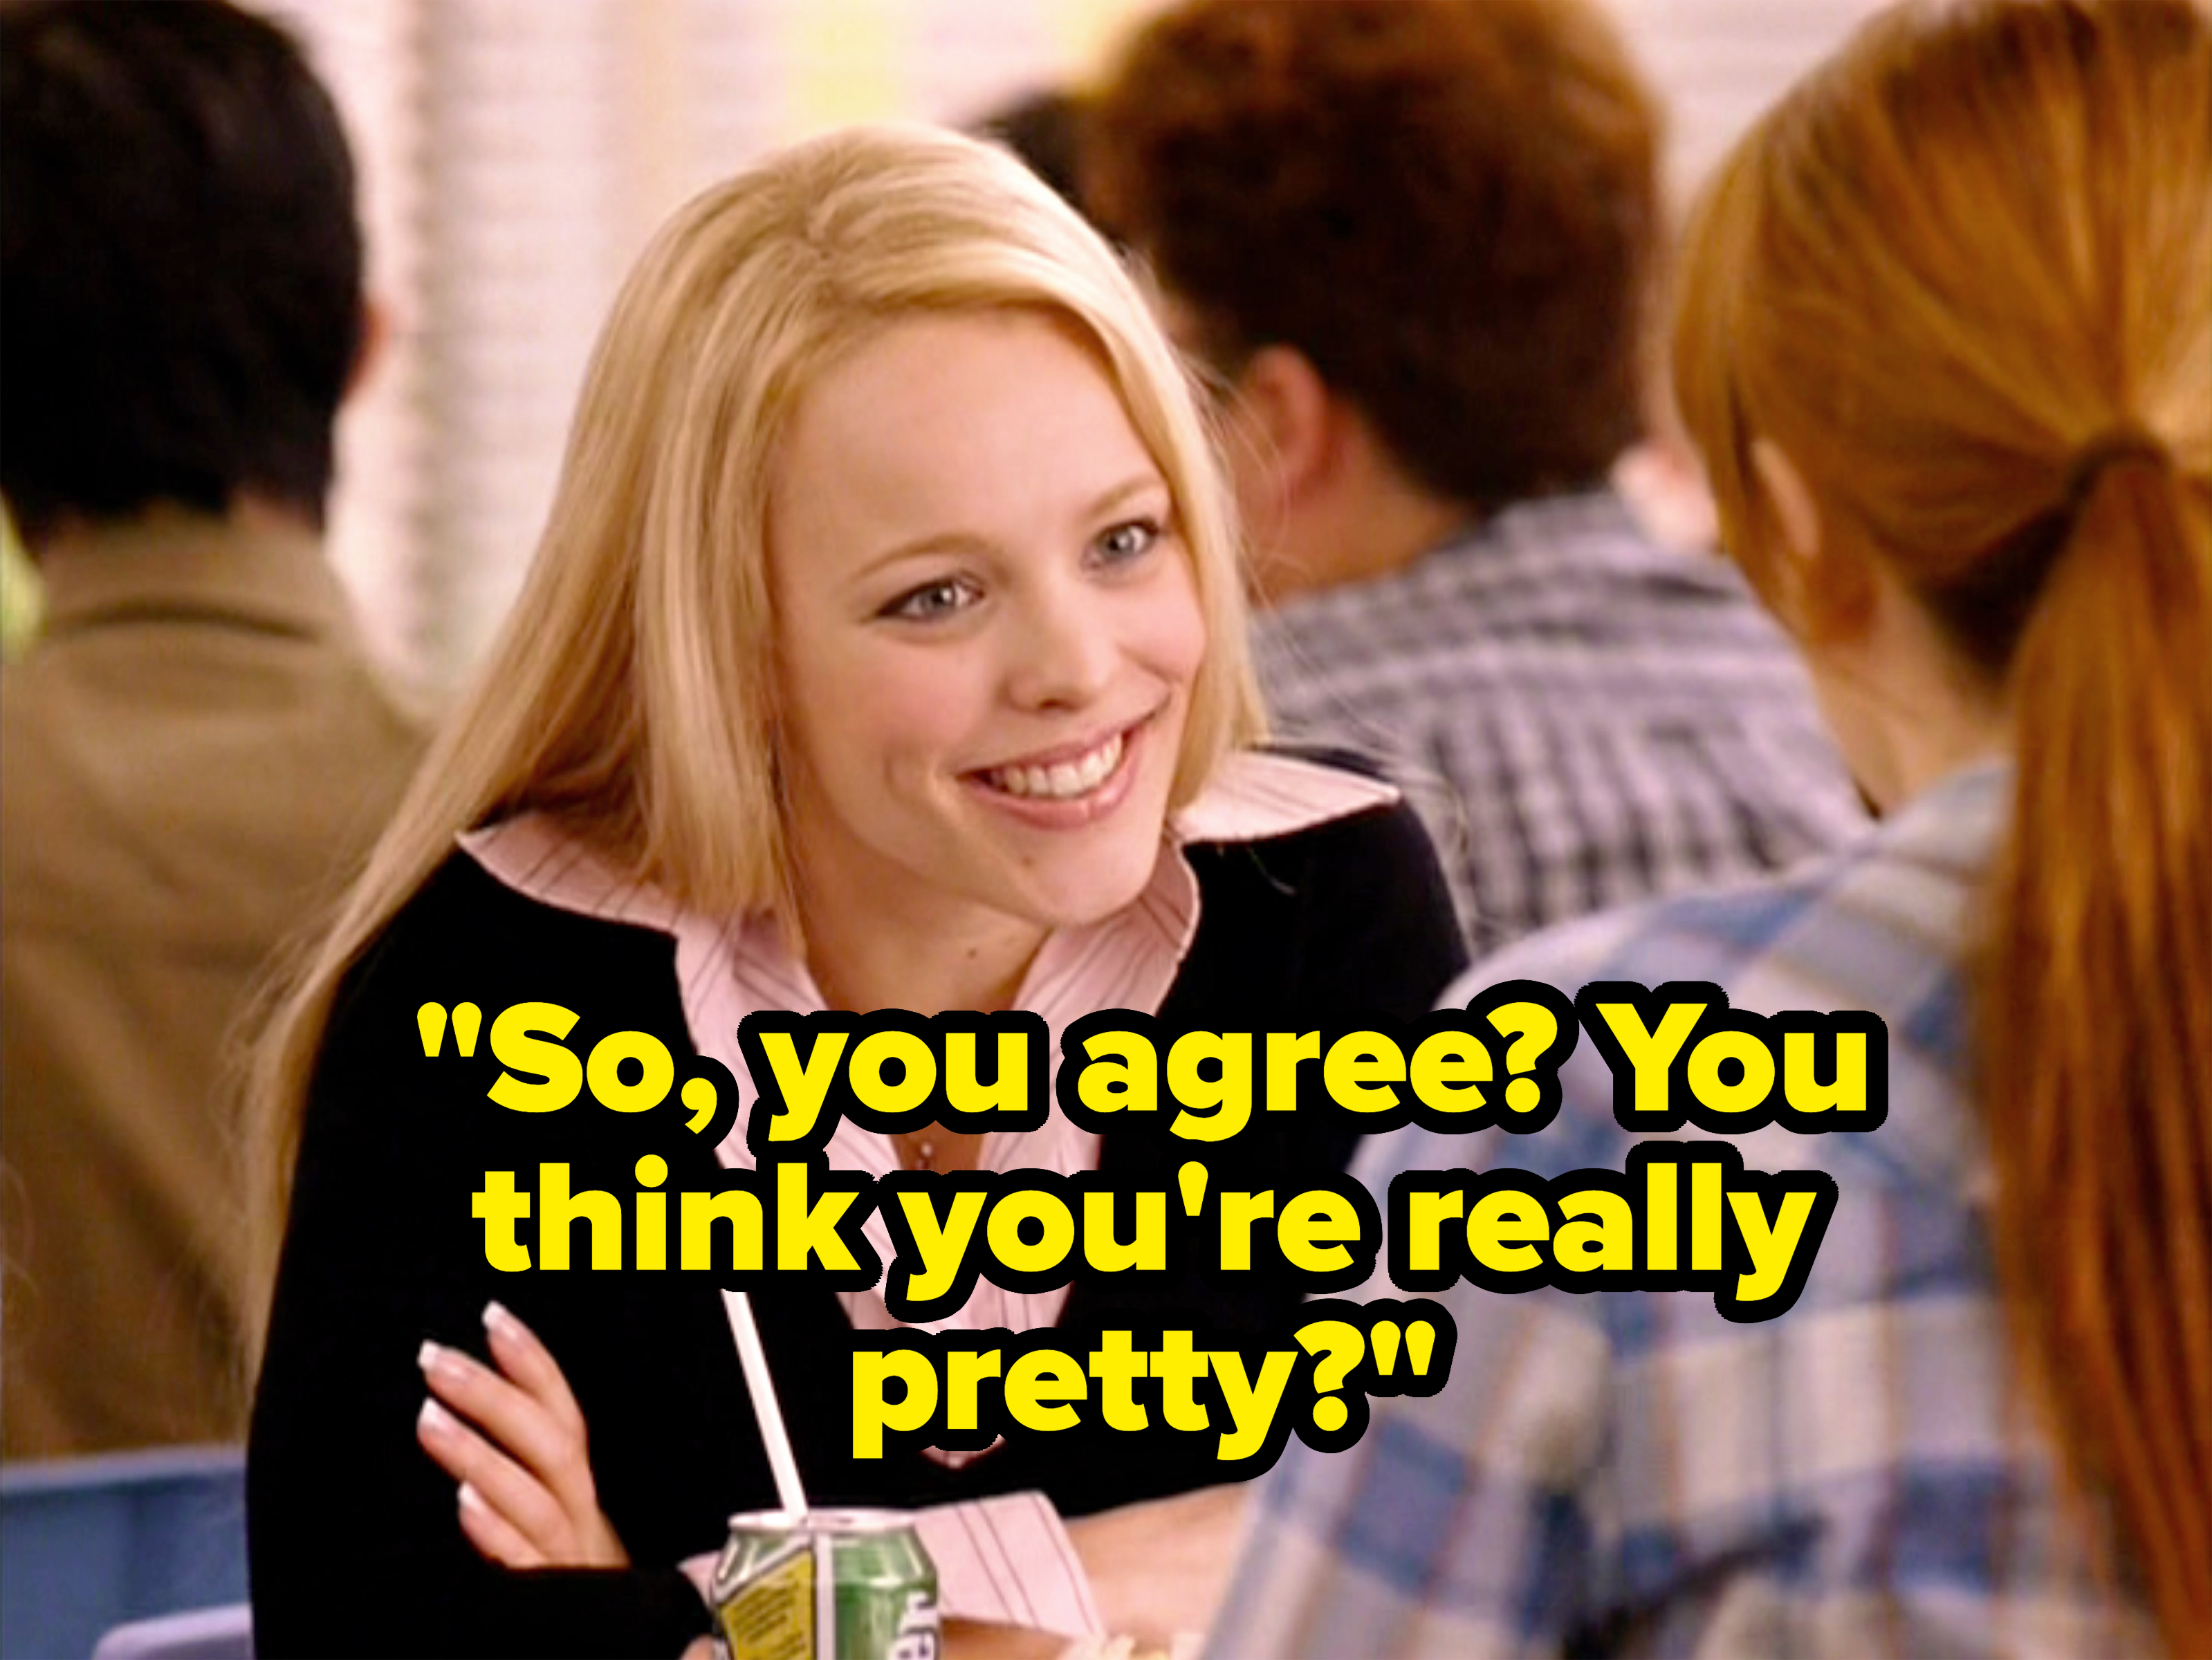 Regina George sits across from Cady Heron and smiles. Text reads &quot;So, you agree? You think you&#x27;re really pretty?&quot;